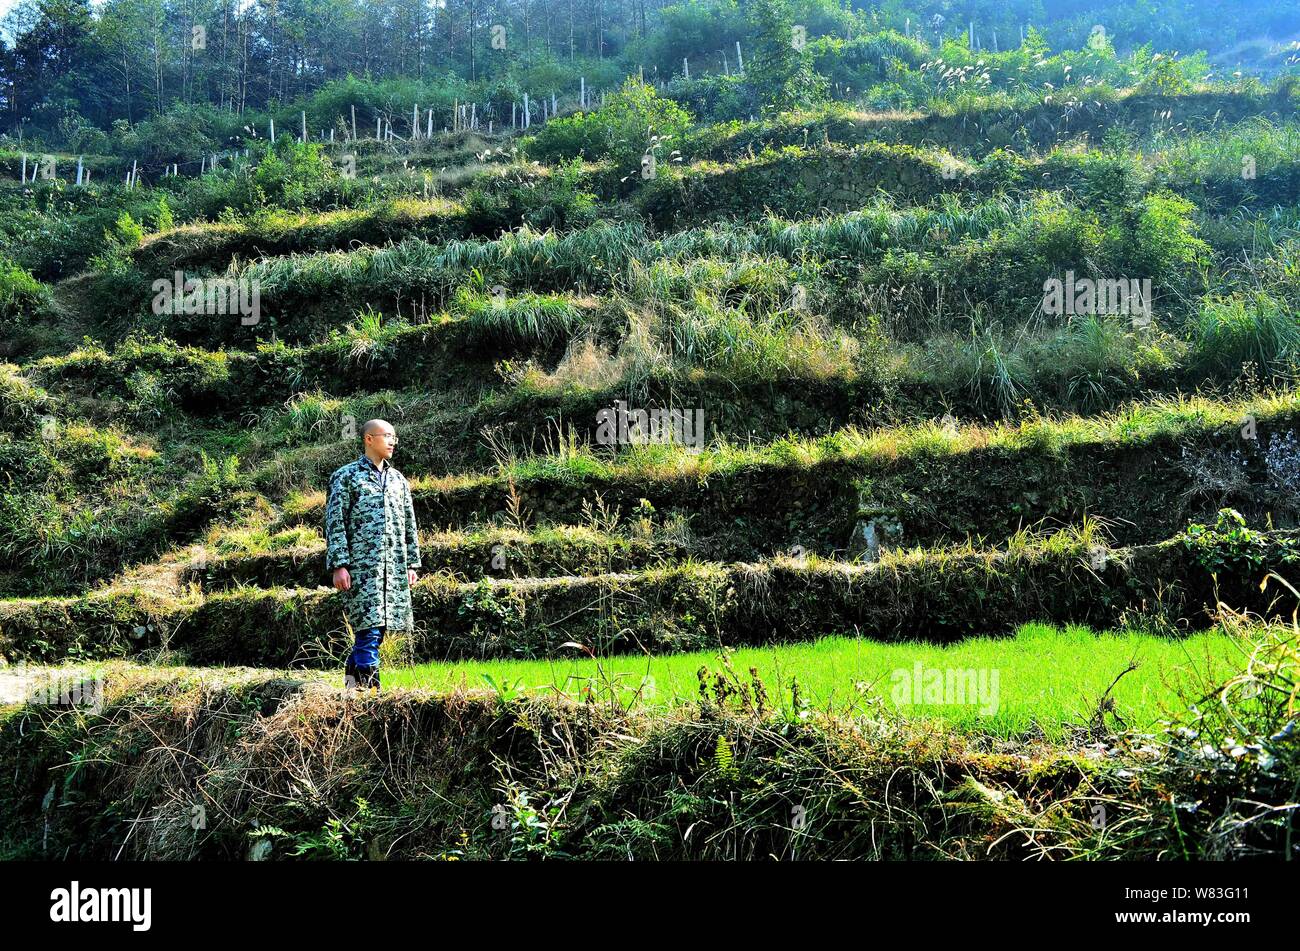 Chinese cattleman Zeng Bo, a doctorate holder in animal nutrition from Chinese Academy of Sciences, inspects his cattle farm in Daxiawei village, Lian Stock Photo